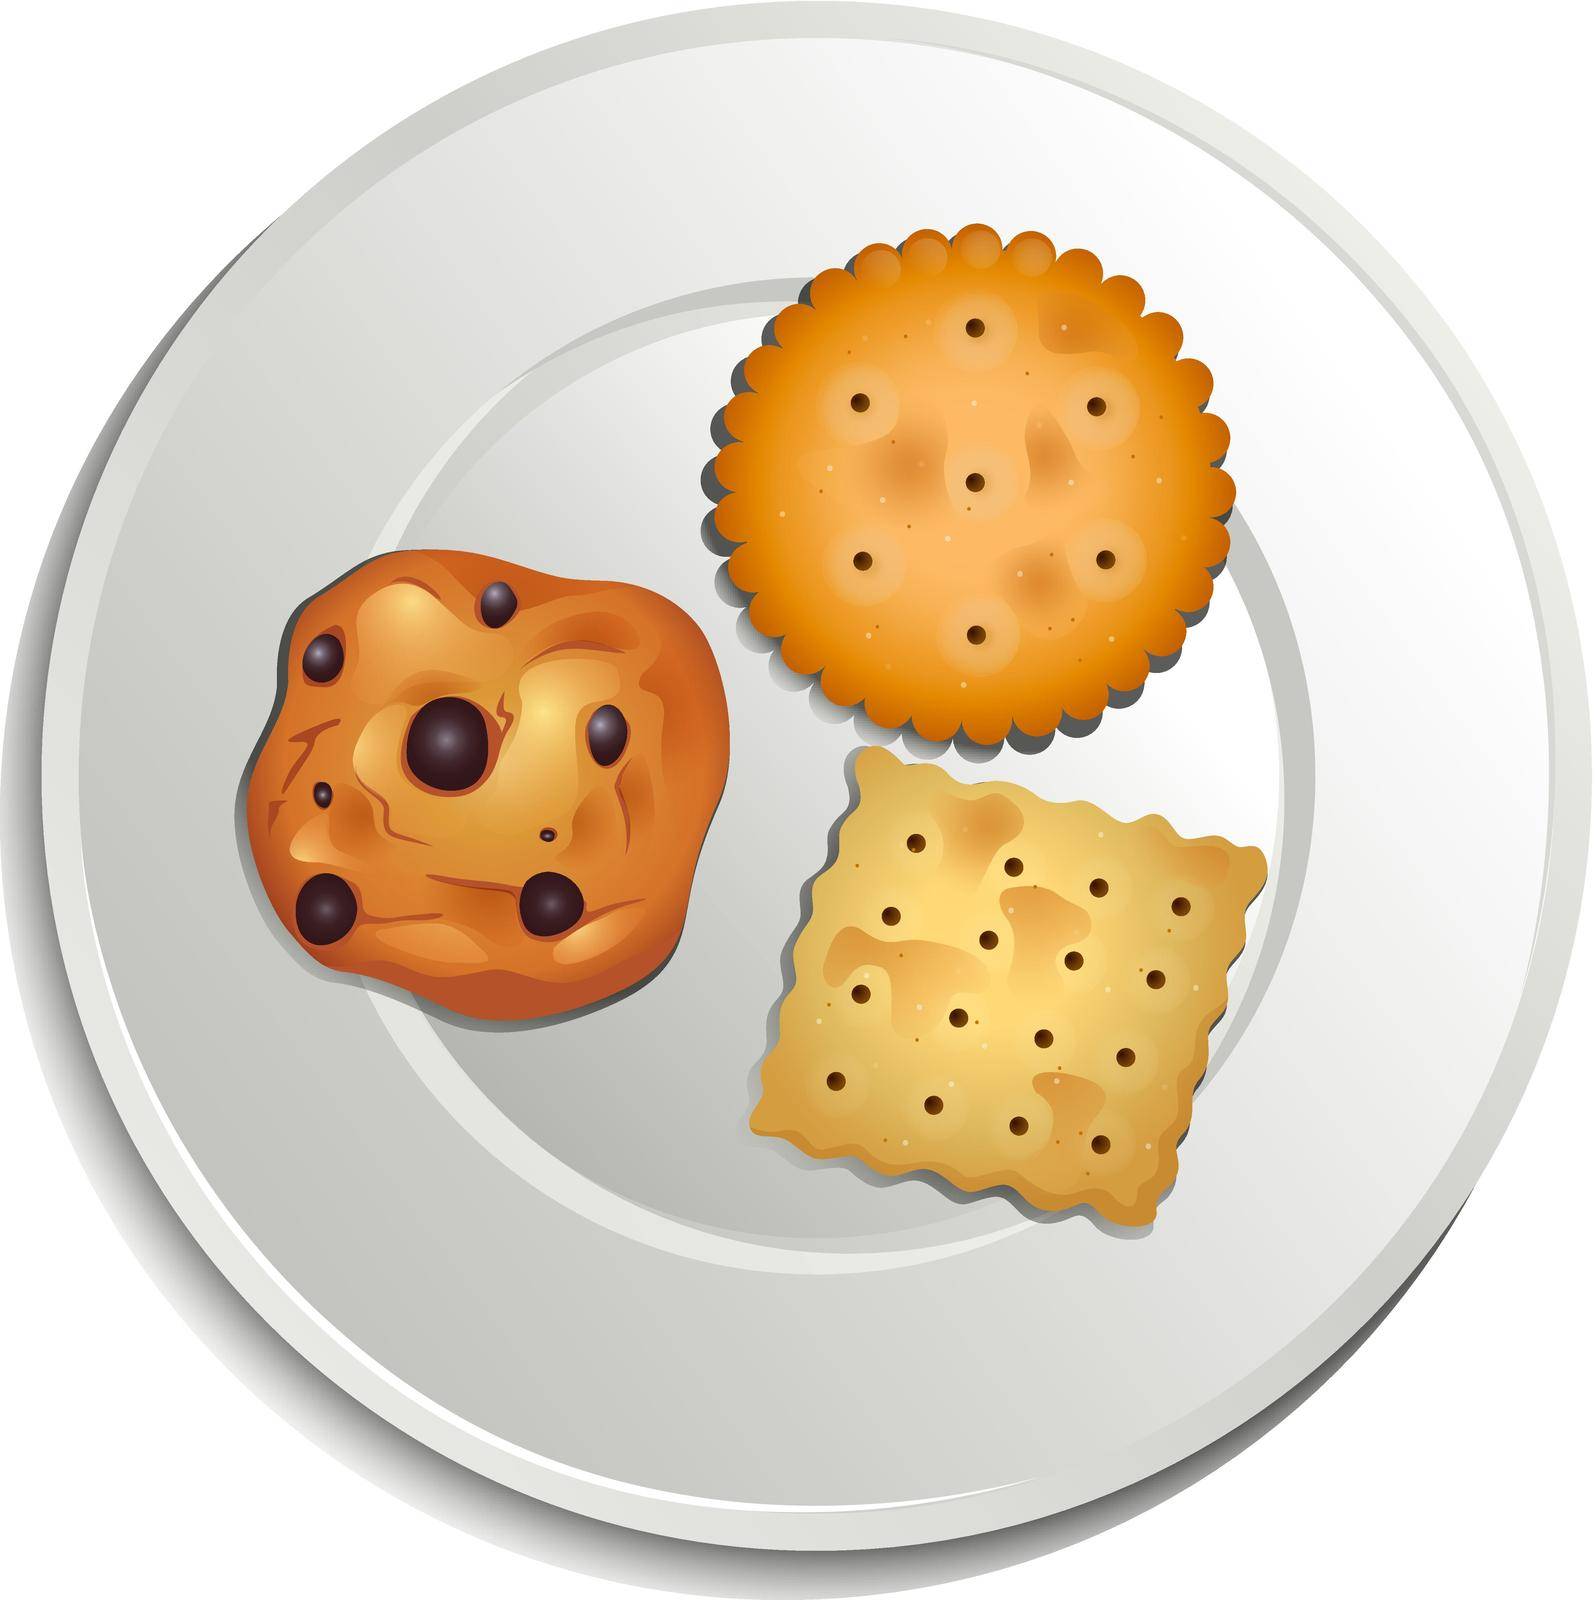 Illustration of a plate with biscuits on a white background